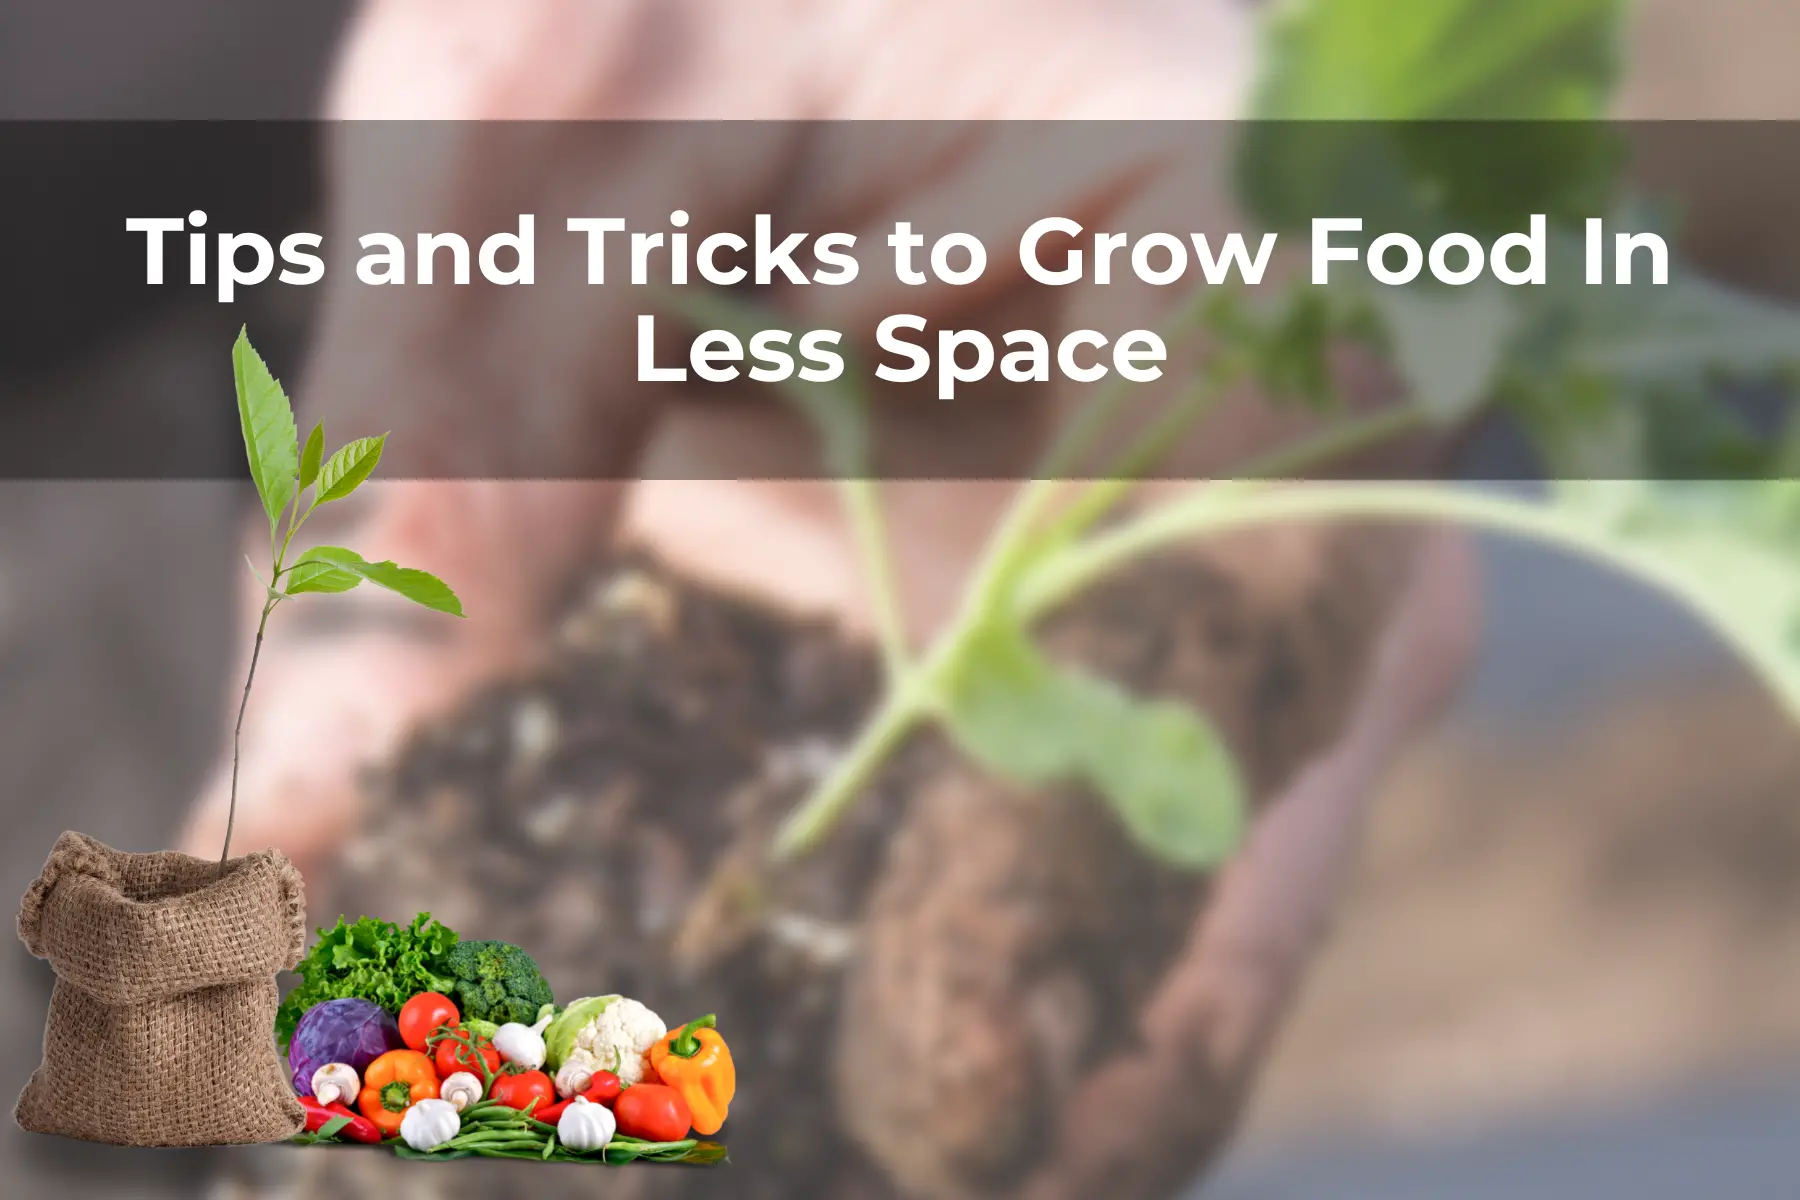 Tips and Tricks to Grow Food In Less Space